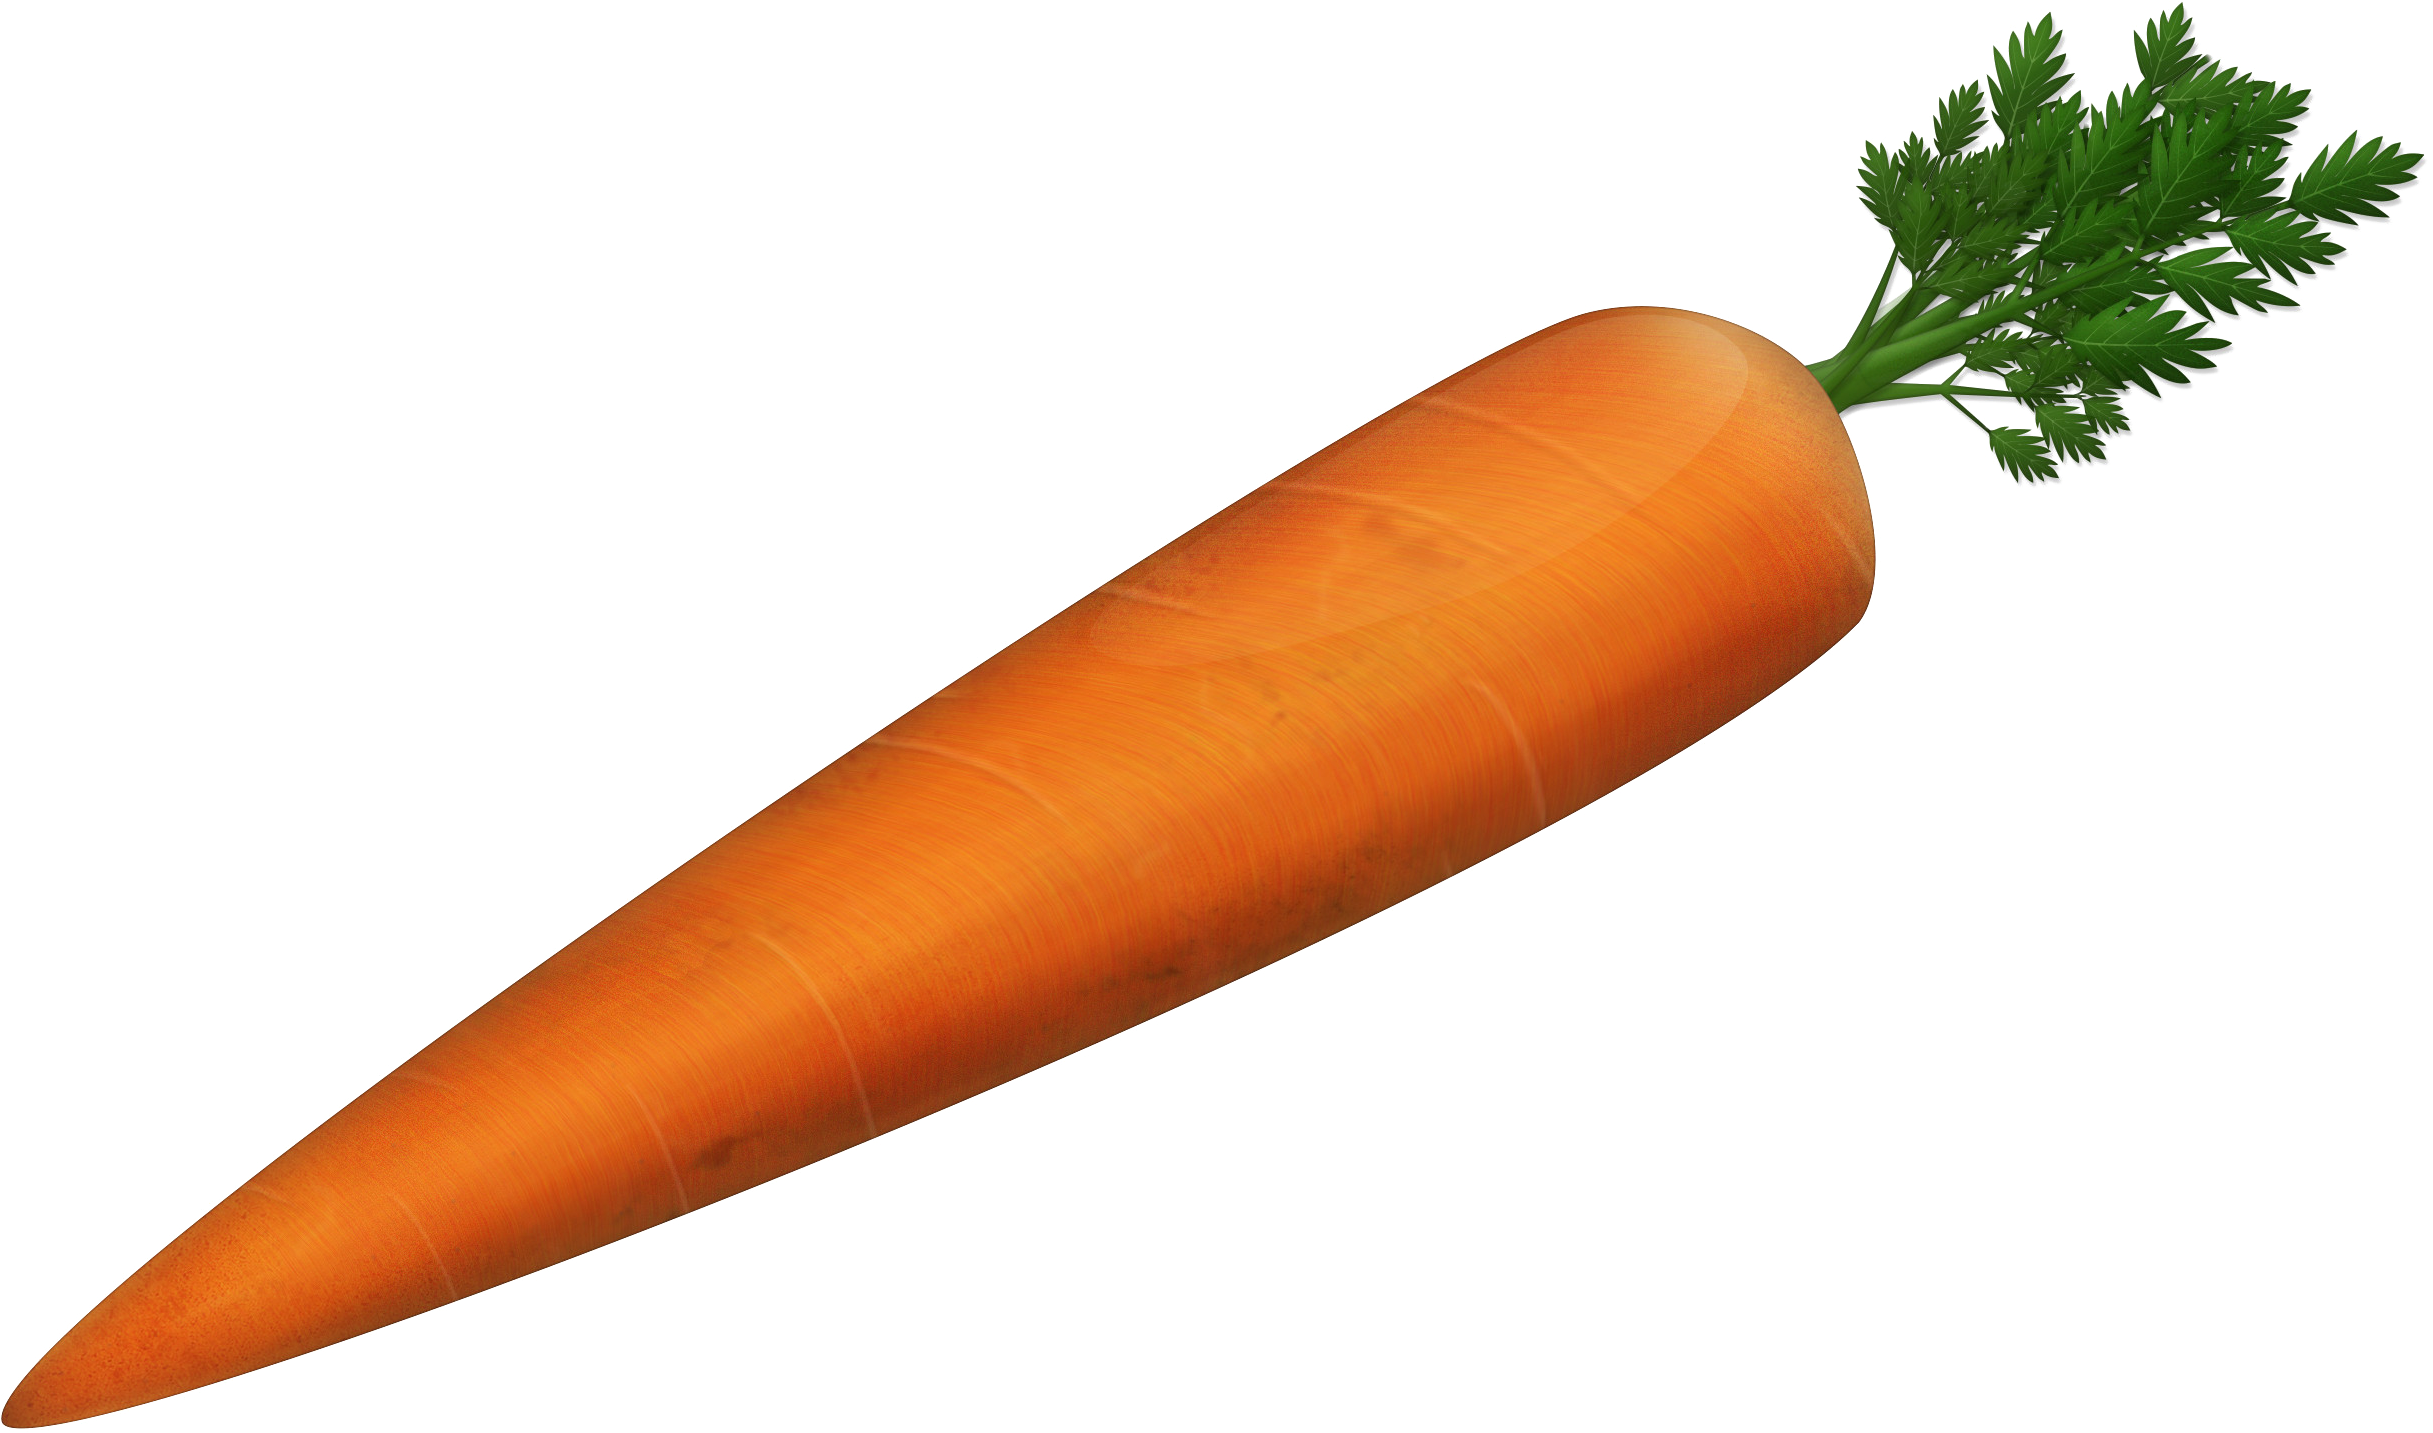 Fresh Whole Carrot Image PNG